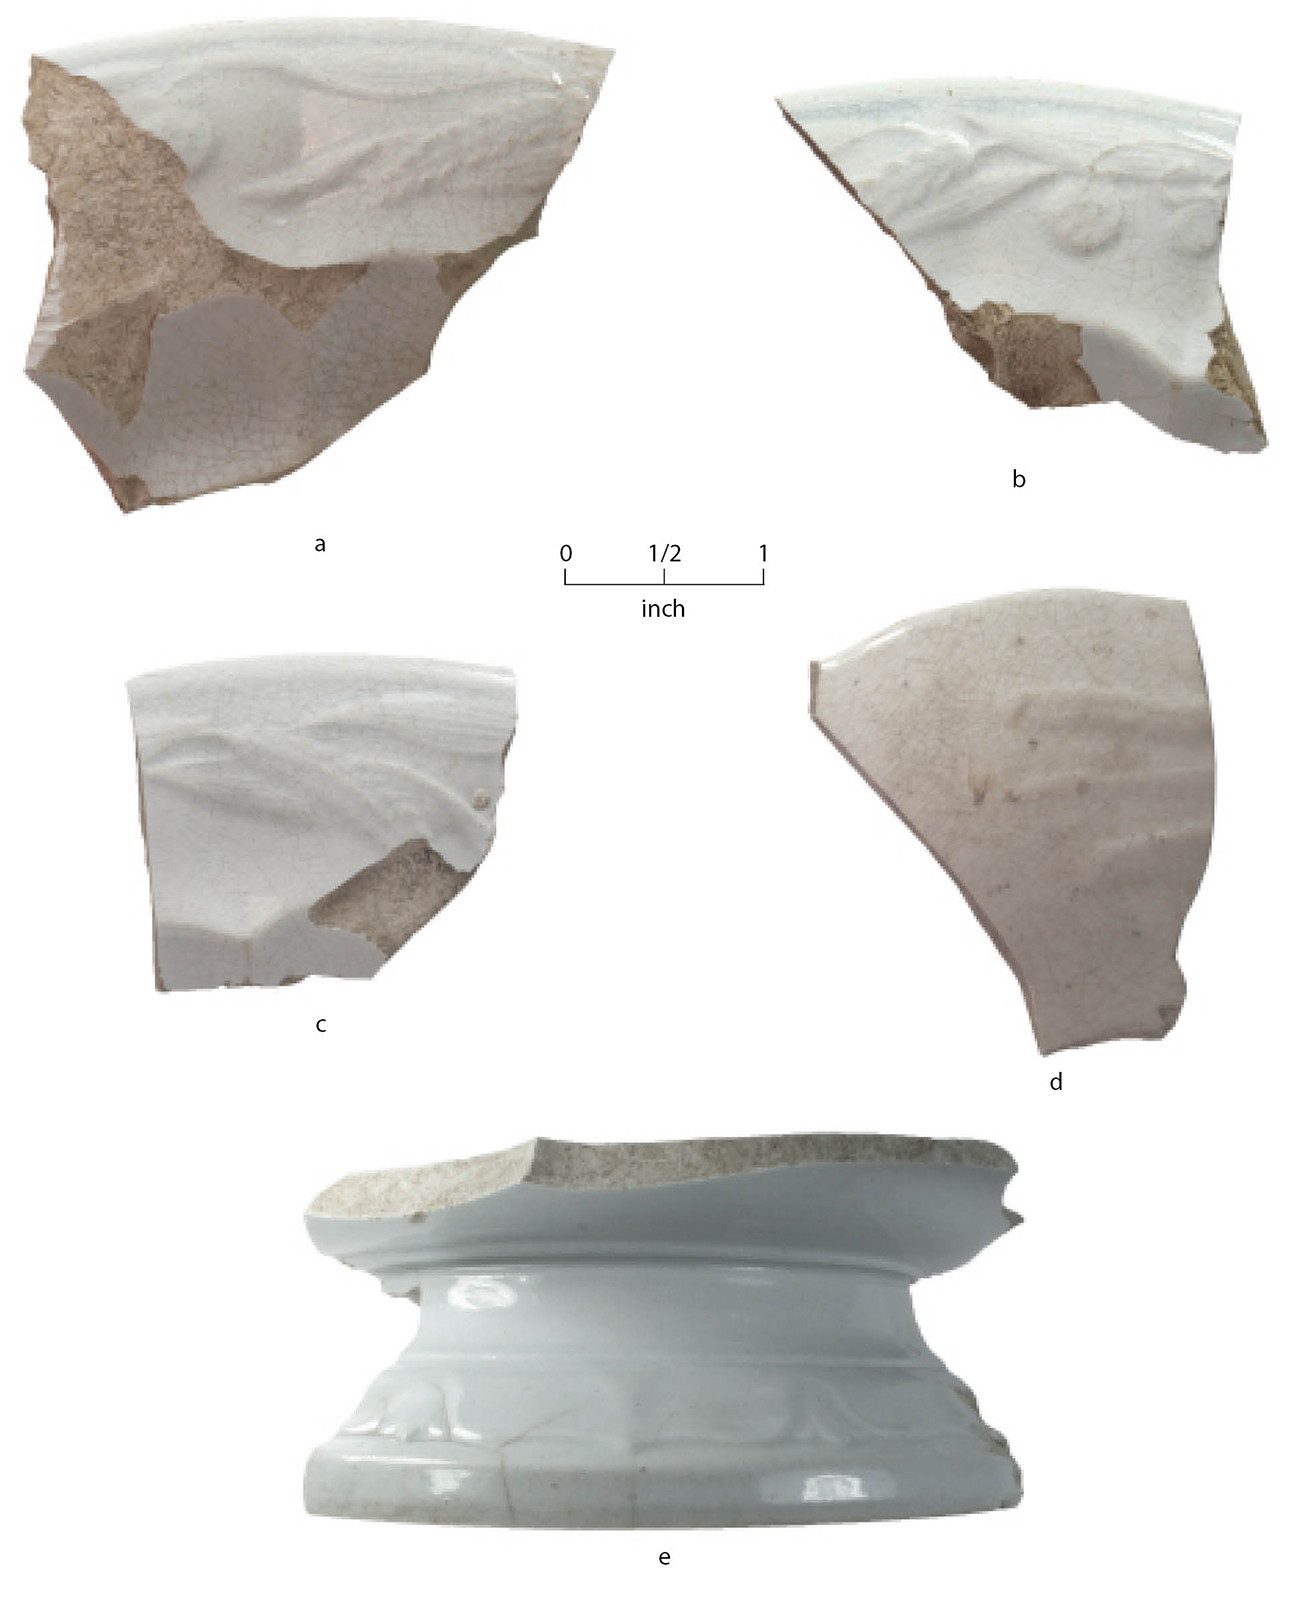 White pottery sherds on a white background with a scale bar.